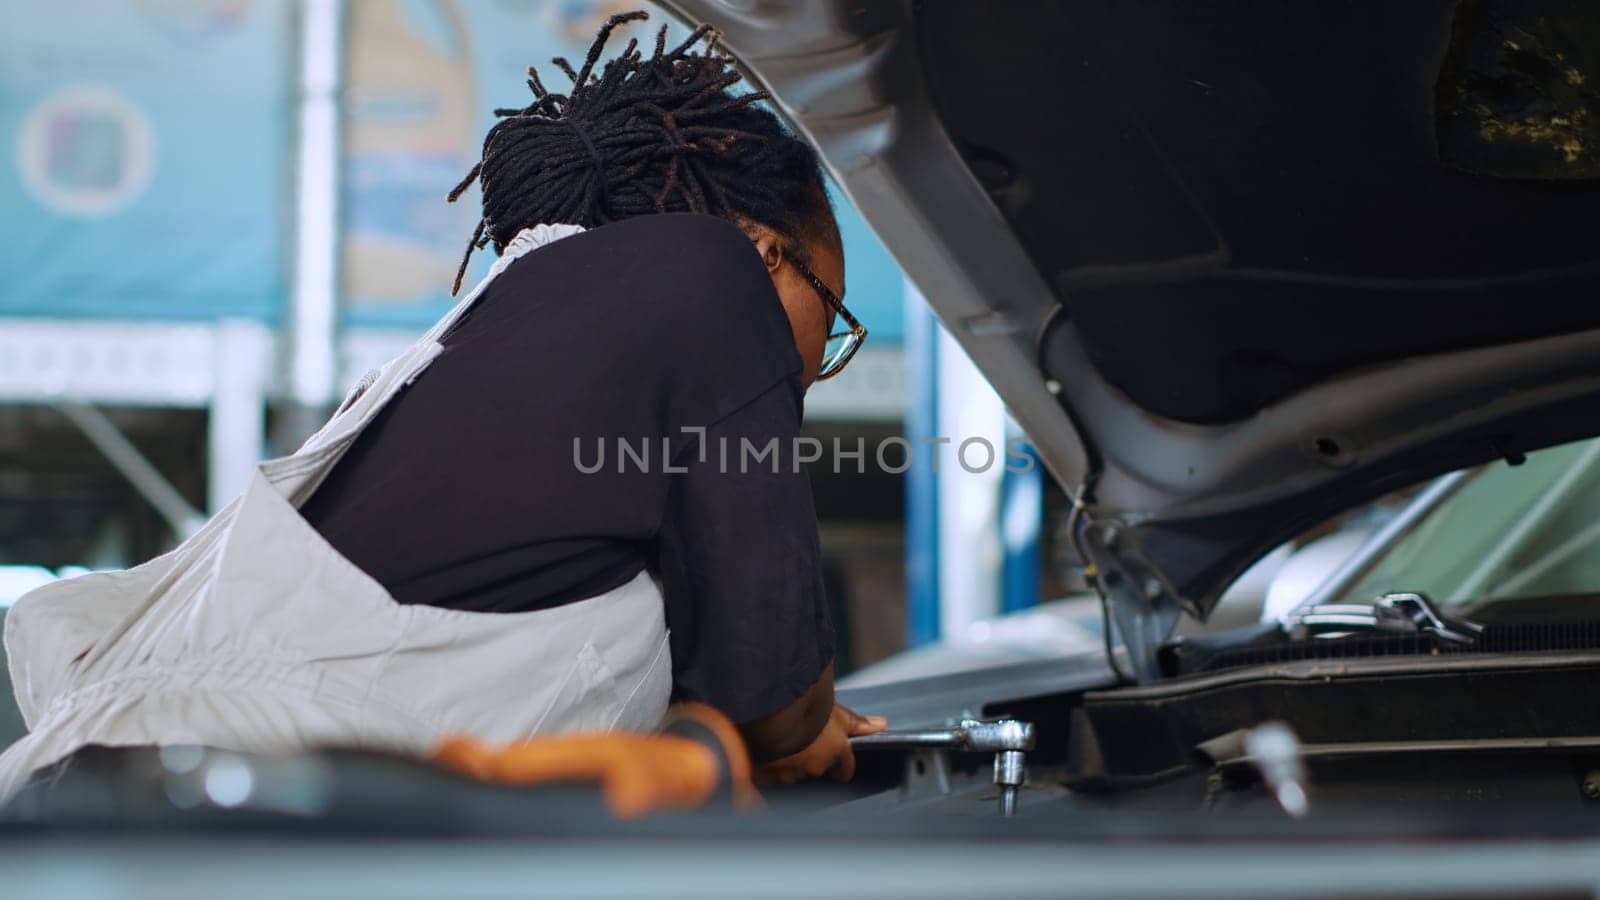 Experienced mechanic in garage using torque wrench to tighten nuts inside opened up vehicle, preparing to change oil. Auto repair shop worker doing checkup on car to prevent damages, close up shot